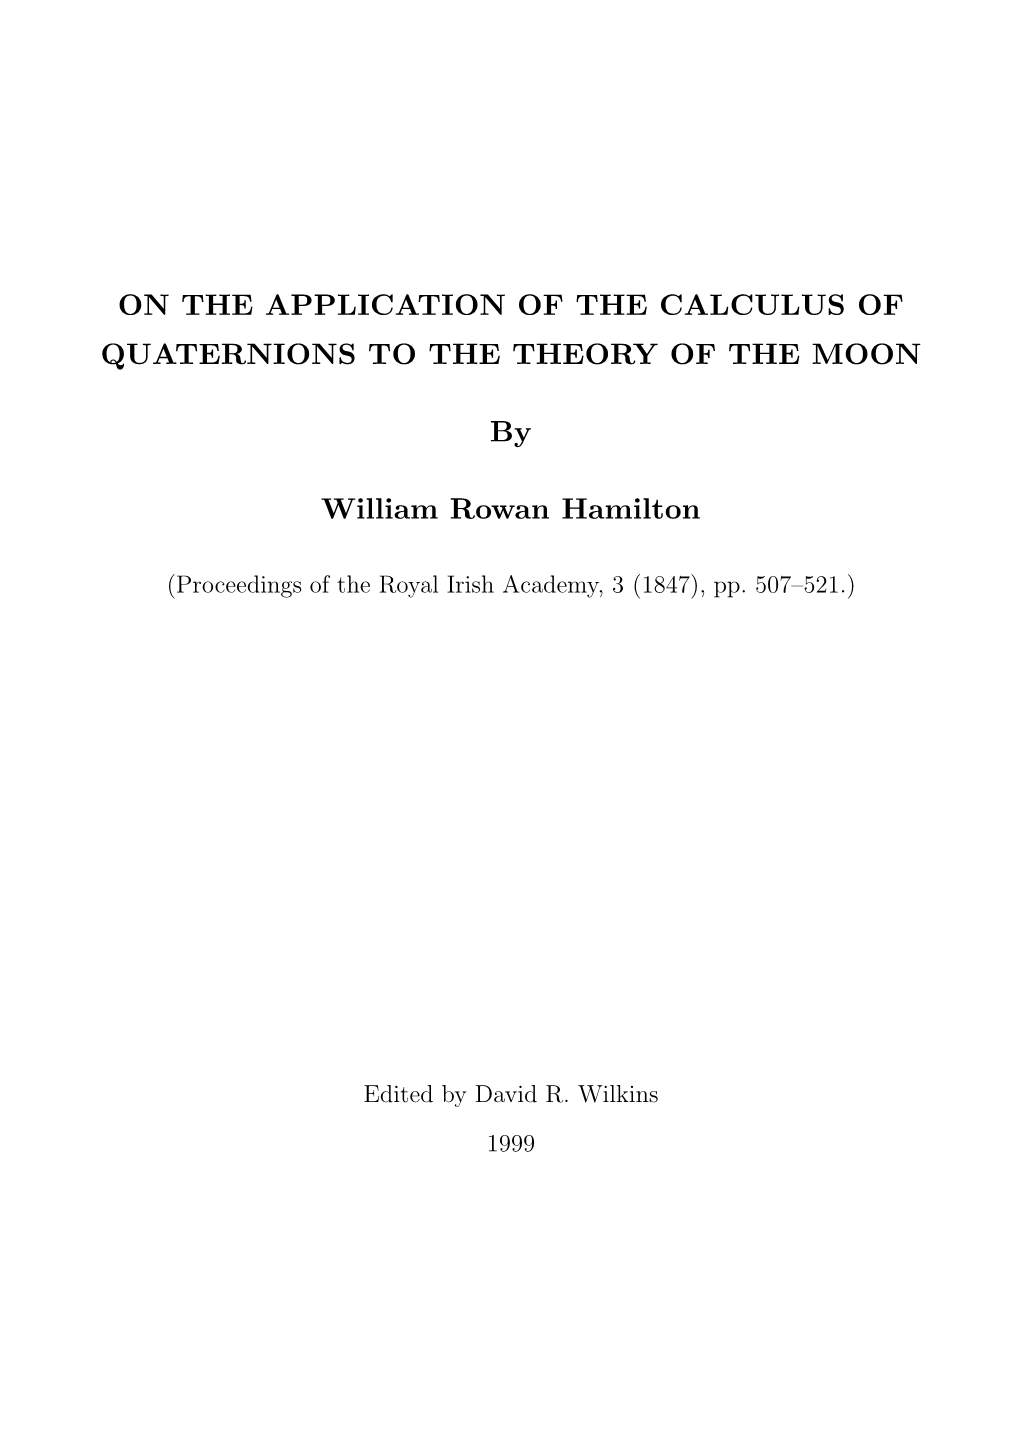 On the Application of the Calculus of Quaternions to the Theory of the Moon